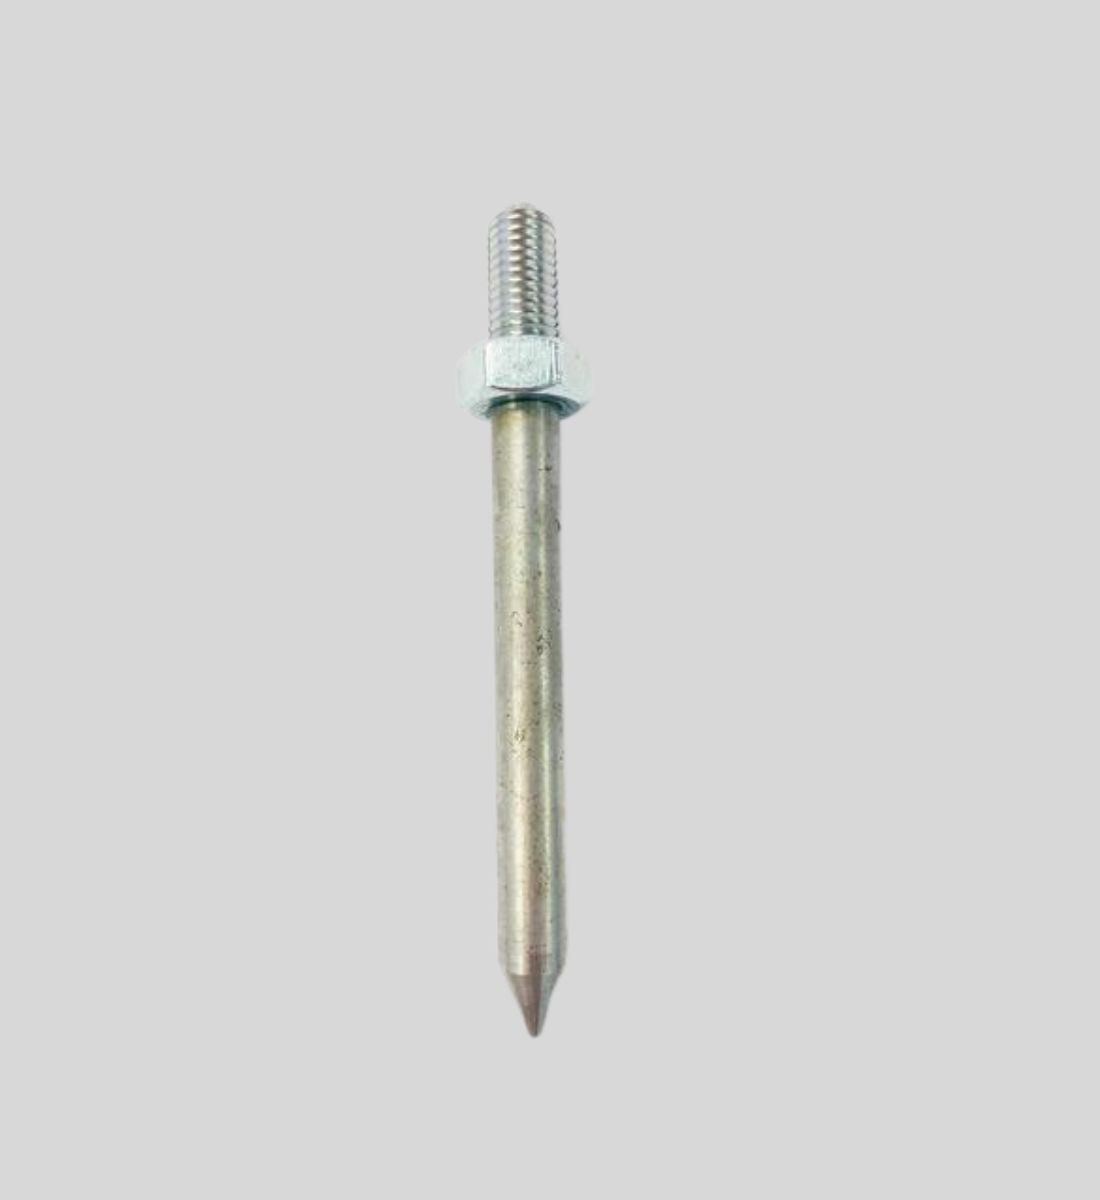 Tracmaster Solid Spike 10 mm